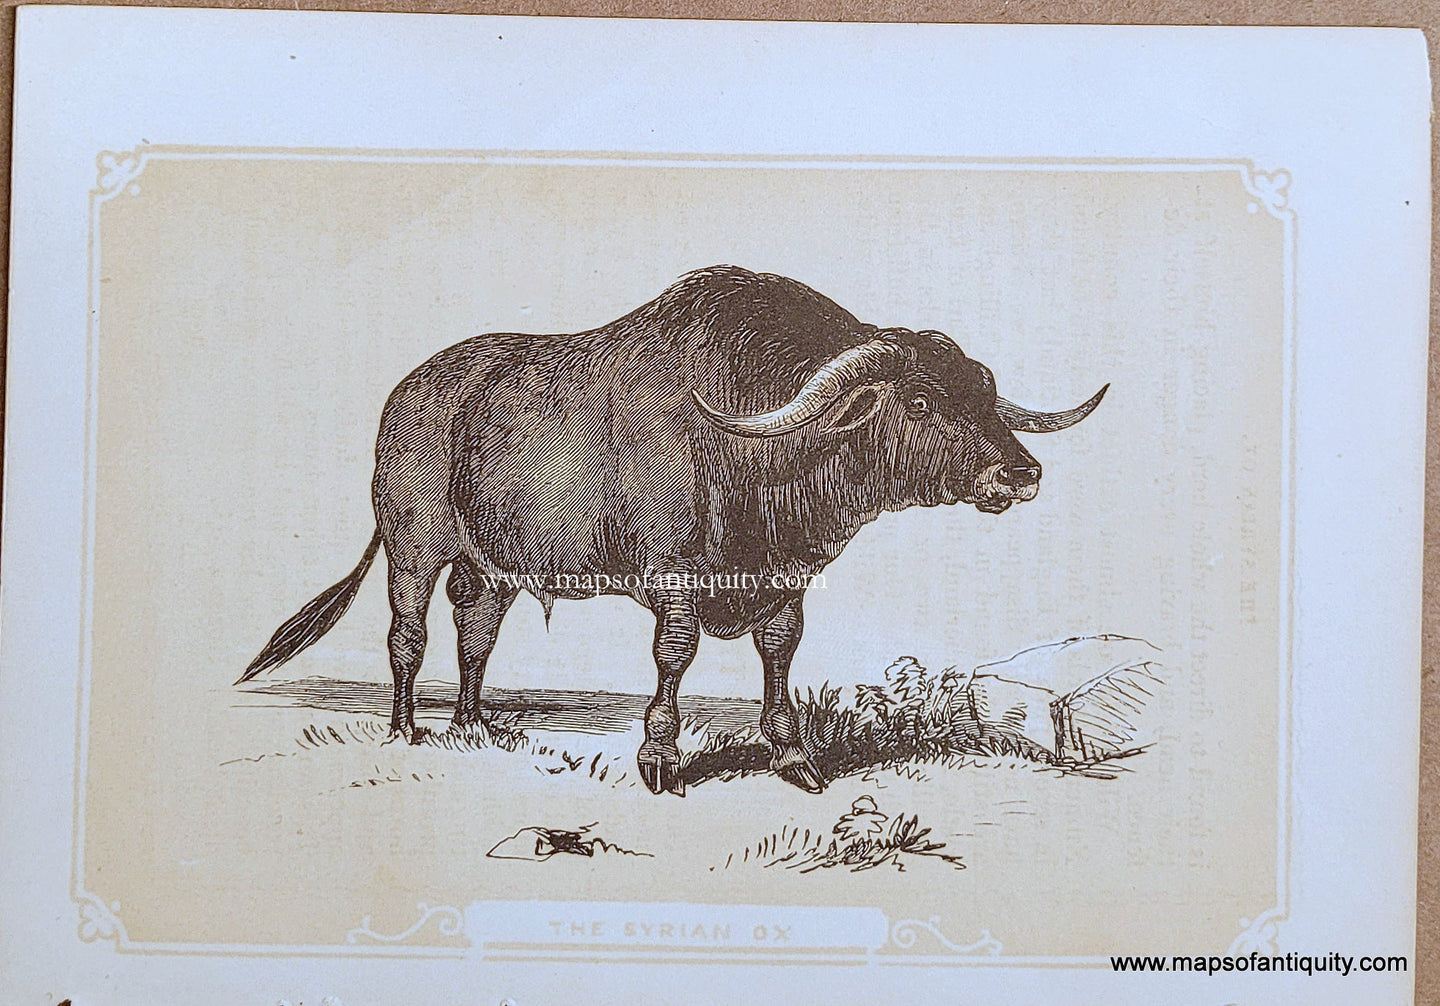 Genuine-Antique-Print-The-Syrian-Ox-1850s-Tallis-Maps-Of-Antiquity